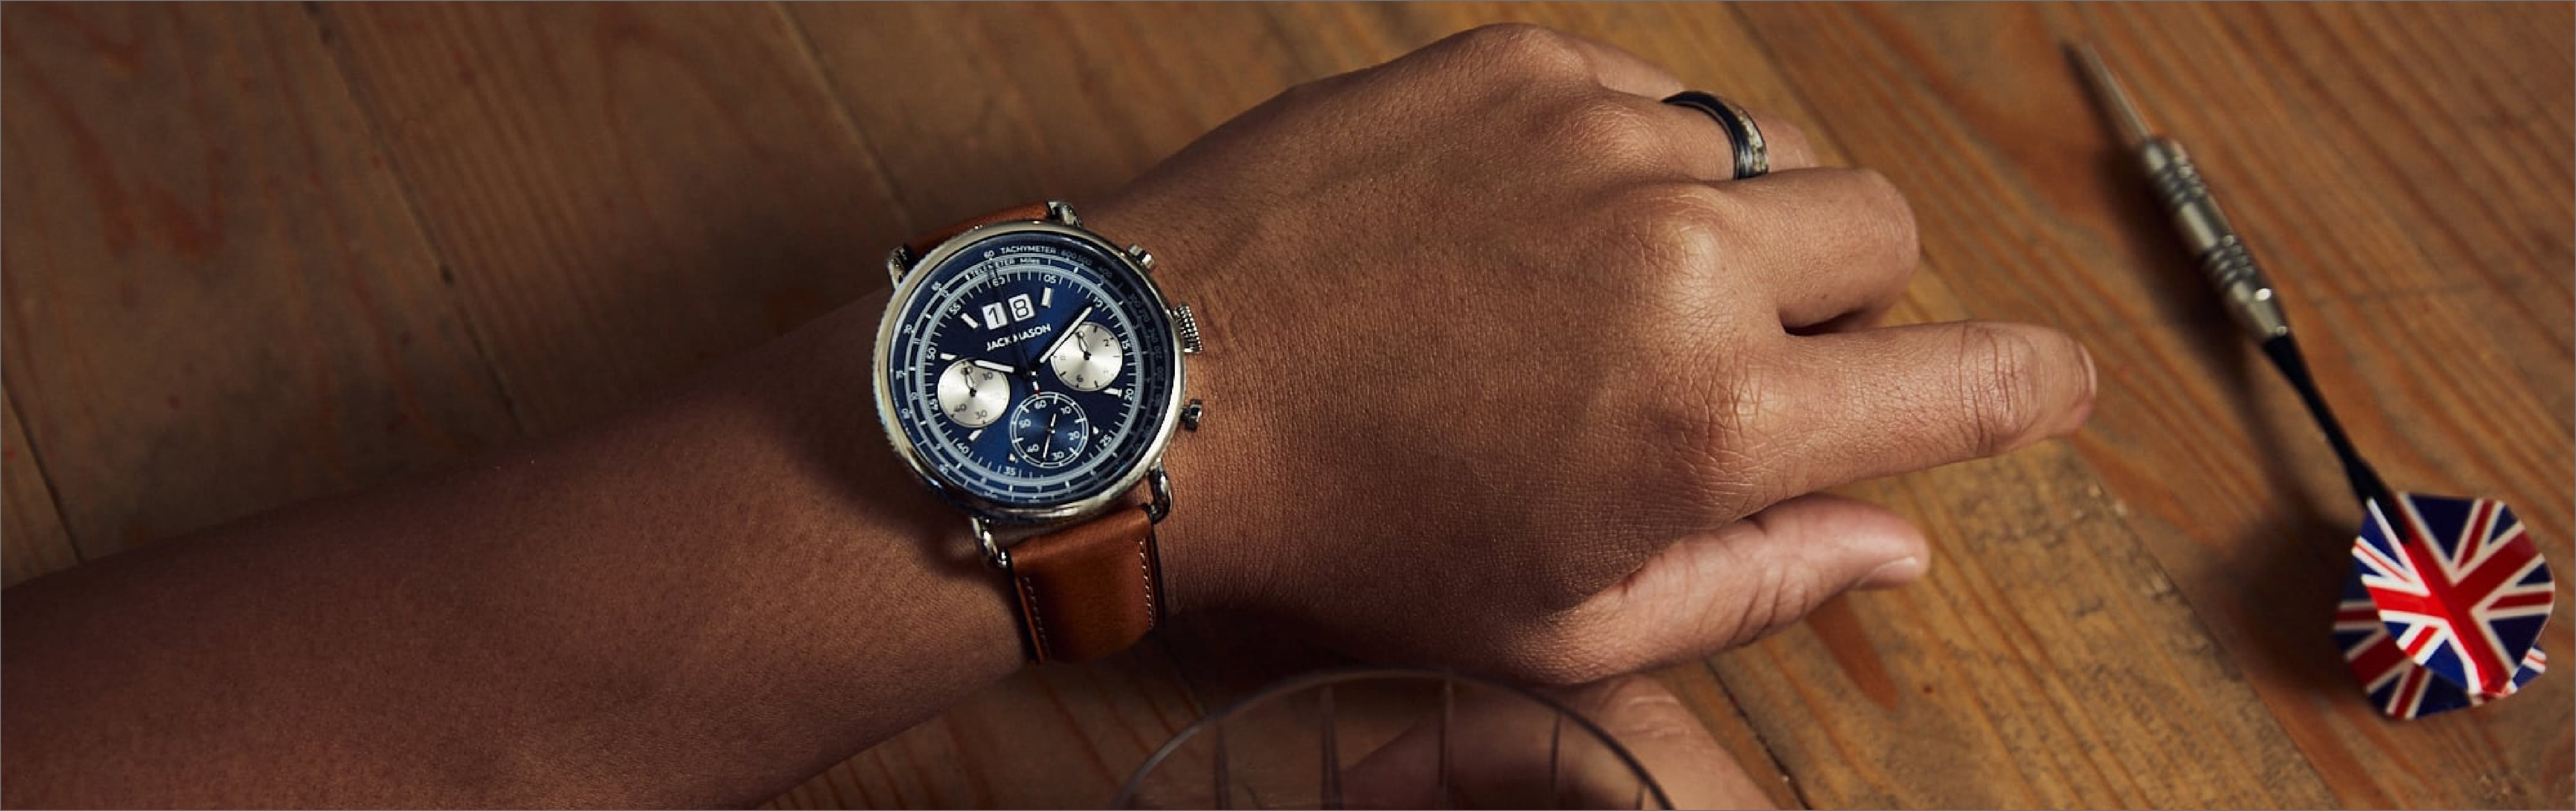 Sport Watches For Men: 8 Cool Sport Watches – Jack Mason